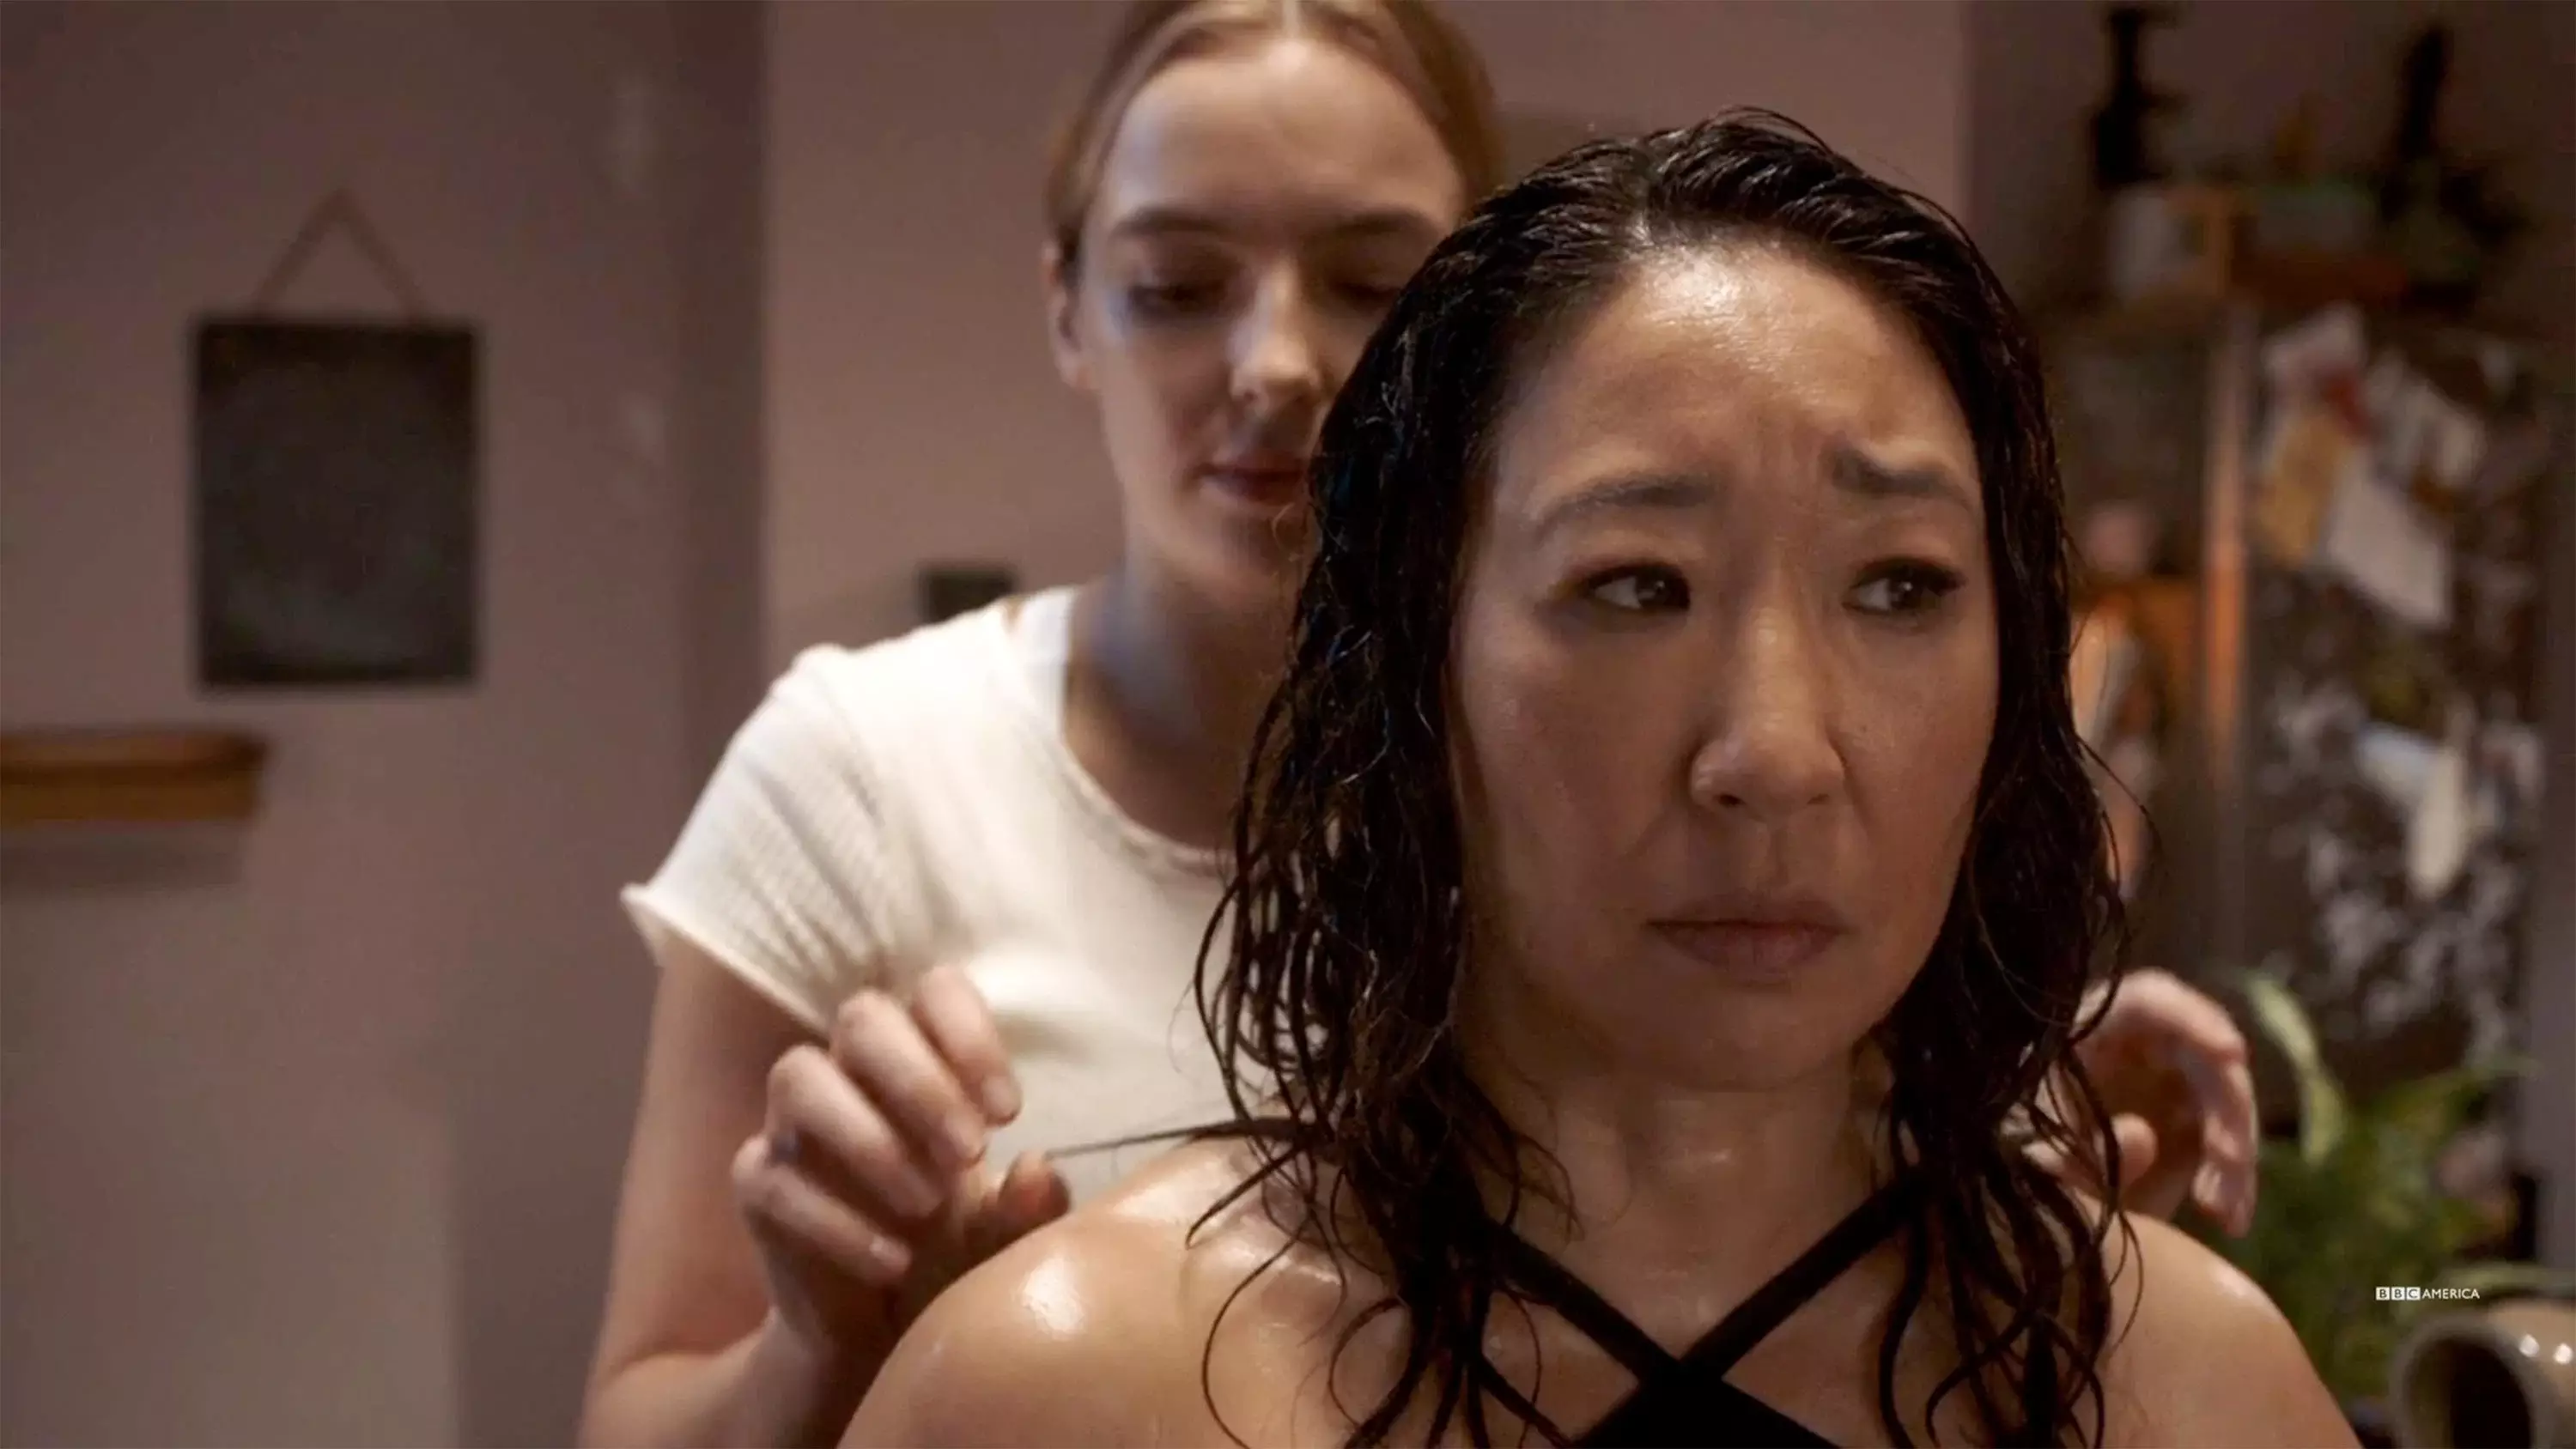 Killing Eve stars Jodie Comer and Sandra Oh are back (